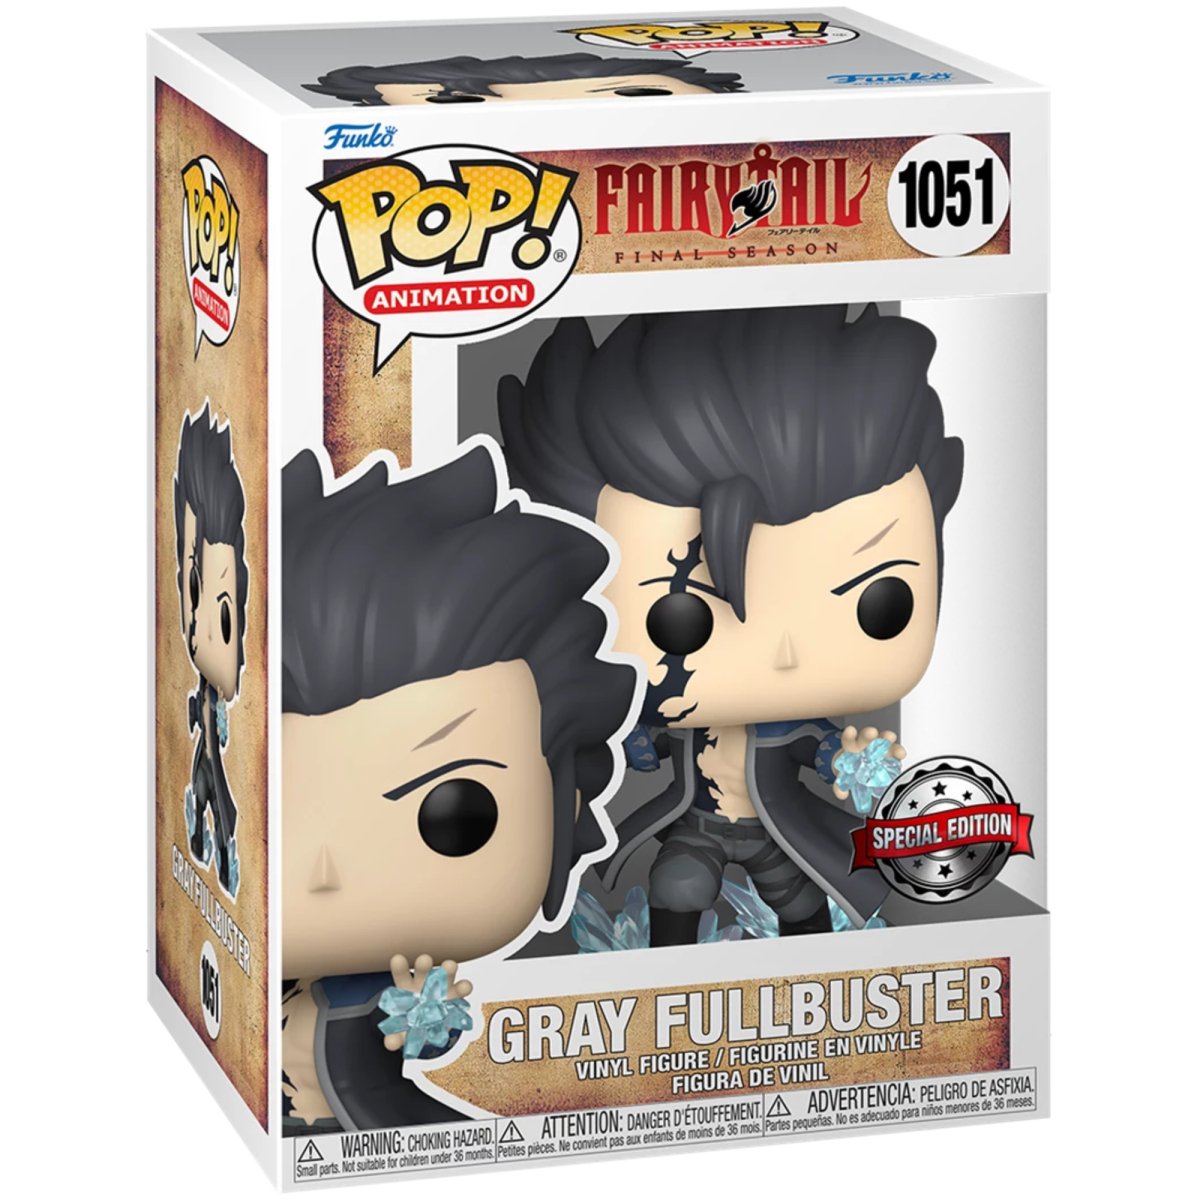 Fairy Tail - Gray Fullbuster (Special Edition) #1051 - Funko Pop! Vinyl Anime - Persona Toys